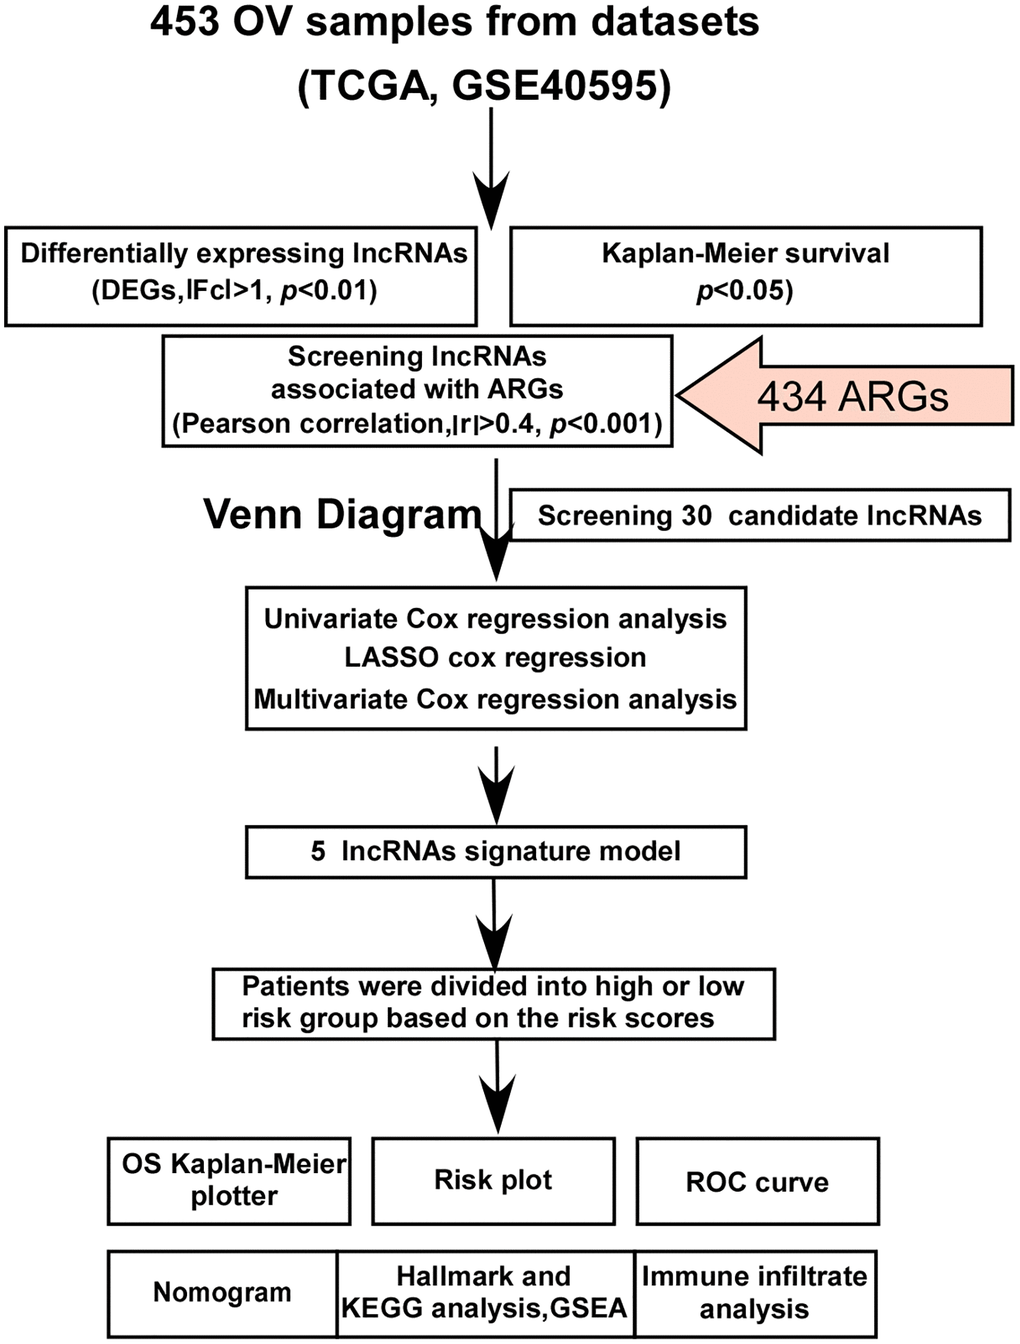 Flowchart of the study. Thirty candidate lncRNAs were identified through Venn diagram analysis of differentially expressed lncRNAs, Kaplan-Meier survival analysis, and lncRNAs associated with ARGs (anoikis-related genes). Subsequently, a novel cancer signature model consisting of five prognostic arlncRNAs was developed for ovarian cancer patients using univariate Cox regression, LASSO analysis, and multivariate Cox regression analysis. The five arlncRNAs signature model was established and the patients were divided into two risk groups based on the risk scores. The accuracy and potential function of this signature were assessed through various analyses, including OS (overall survival) Kaplan-Meier analysis, risk plot analysis, ROC (receiver operating characteristic) curve analysis, nomogram construction, hallmark analysis, KEGG (Kyoto Encyclopedia of Genes and Genomes) analysis, GSEA (gene set enrichment analysis), and immune infiltrate analysis. OV refers to ovarian cancer, TCGA refers to The Cancer Genome Atlas, lncRNAs stands for long noncoding RNAs, DEGs represents differentially expressed genes, ARGs denotes anoikis-related genes, LASSO refers to least absolute shrinkage and selection operator, OS refers to overall survival, ROC stands for receiver operating characteristic, KEGG refers to Kyoto Encyclopedia of Genes and Genomes, and GSEA represents gene set enrichment analysis.